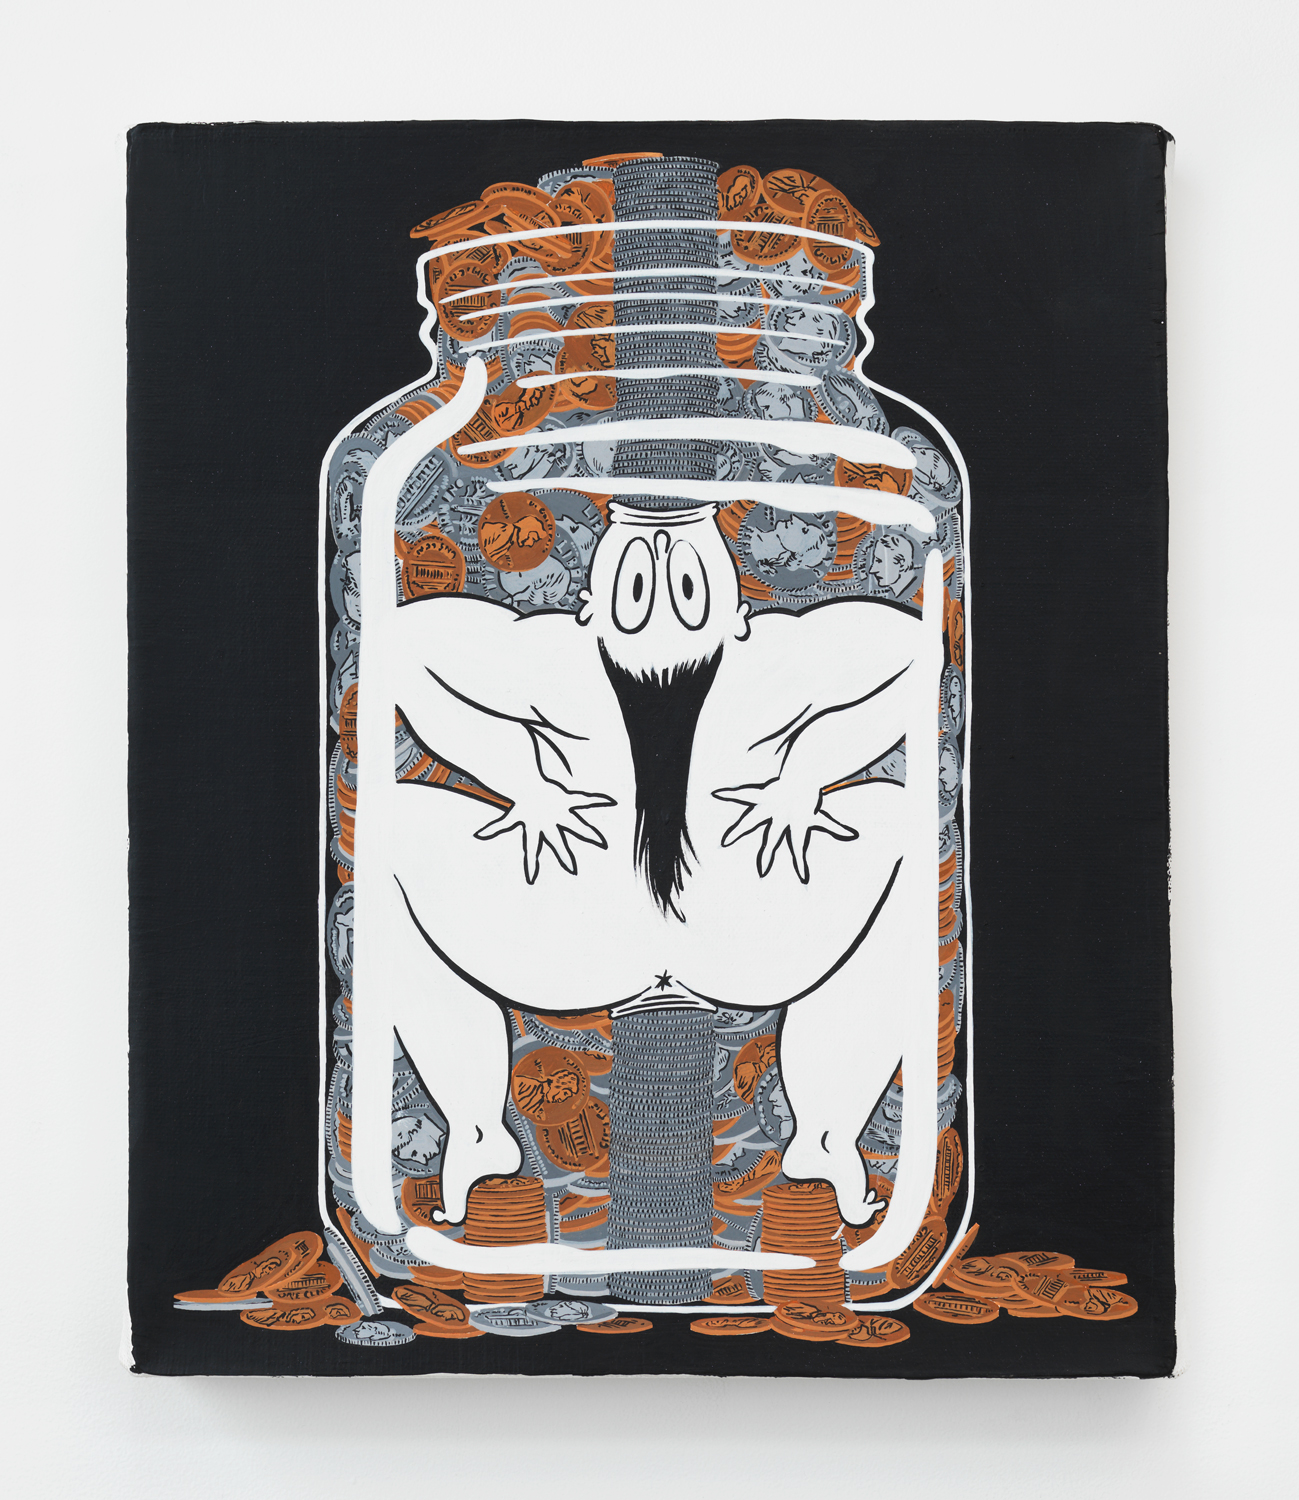 Ebecho Muslimova, Untitled (Jar), 2017, acrylic and gouache on canvas, 12h x 10w in.